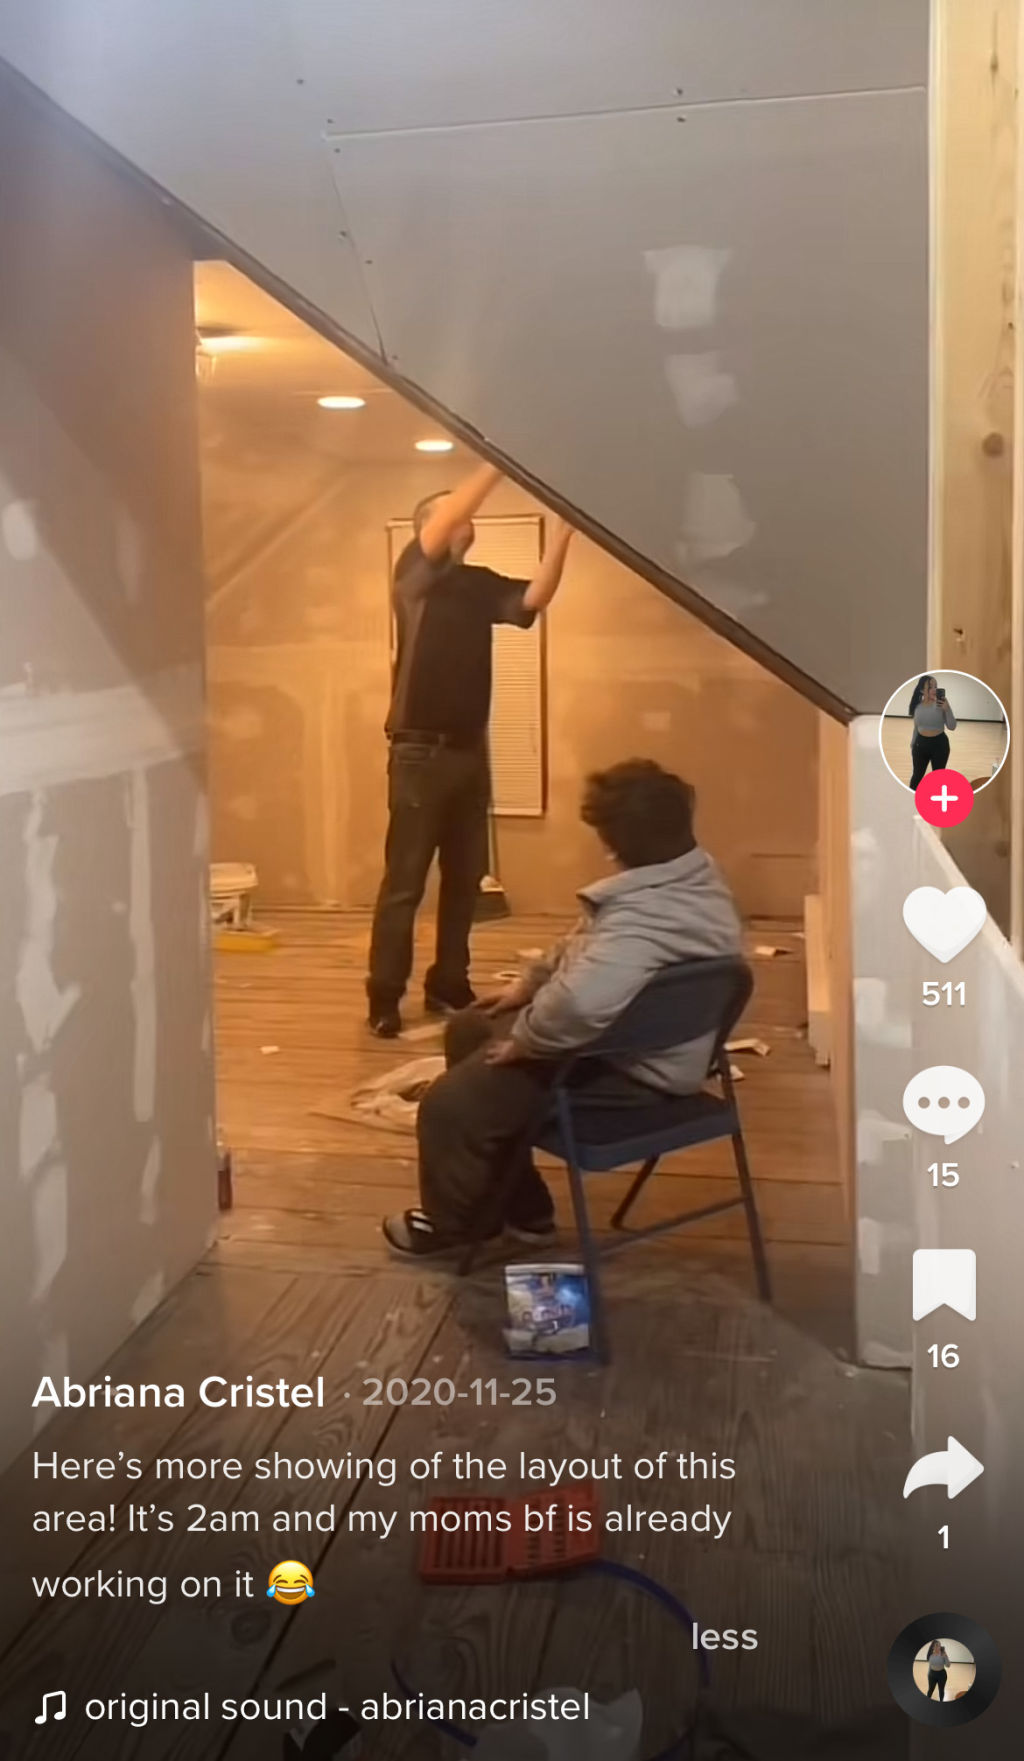 Tiktok users were curious why the renters had no peeked through the external window, but they explained they had, without success.